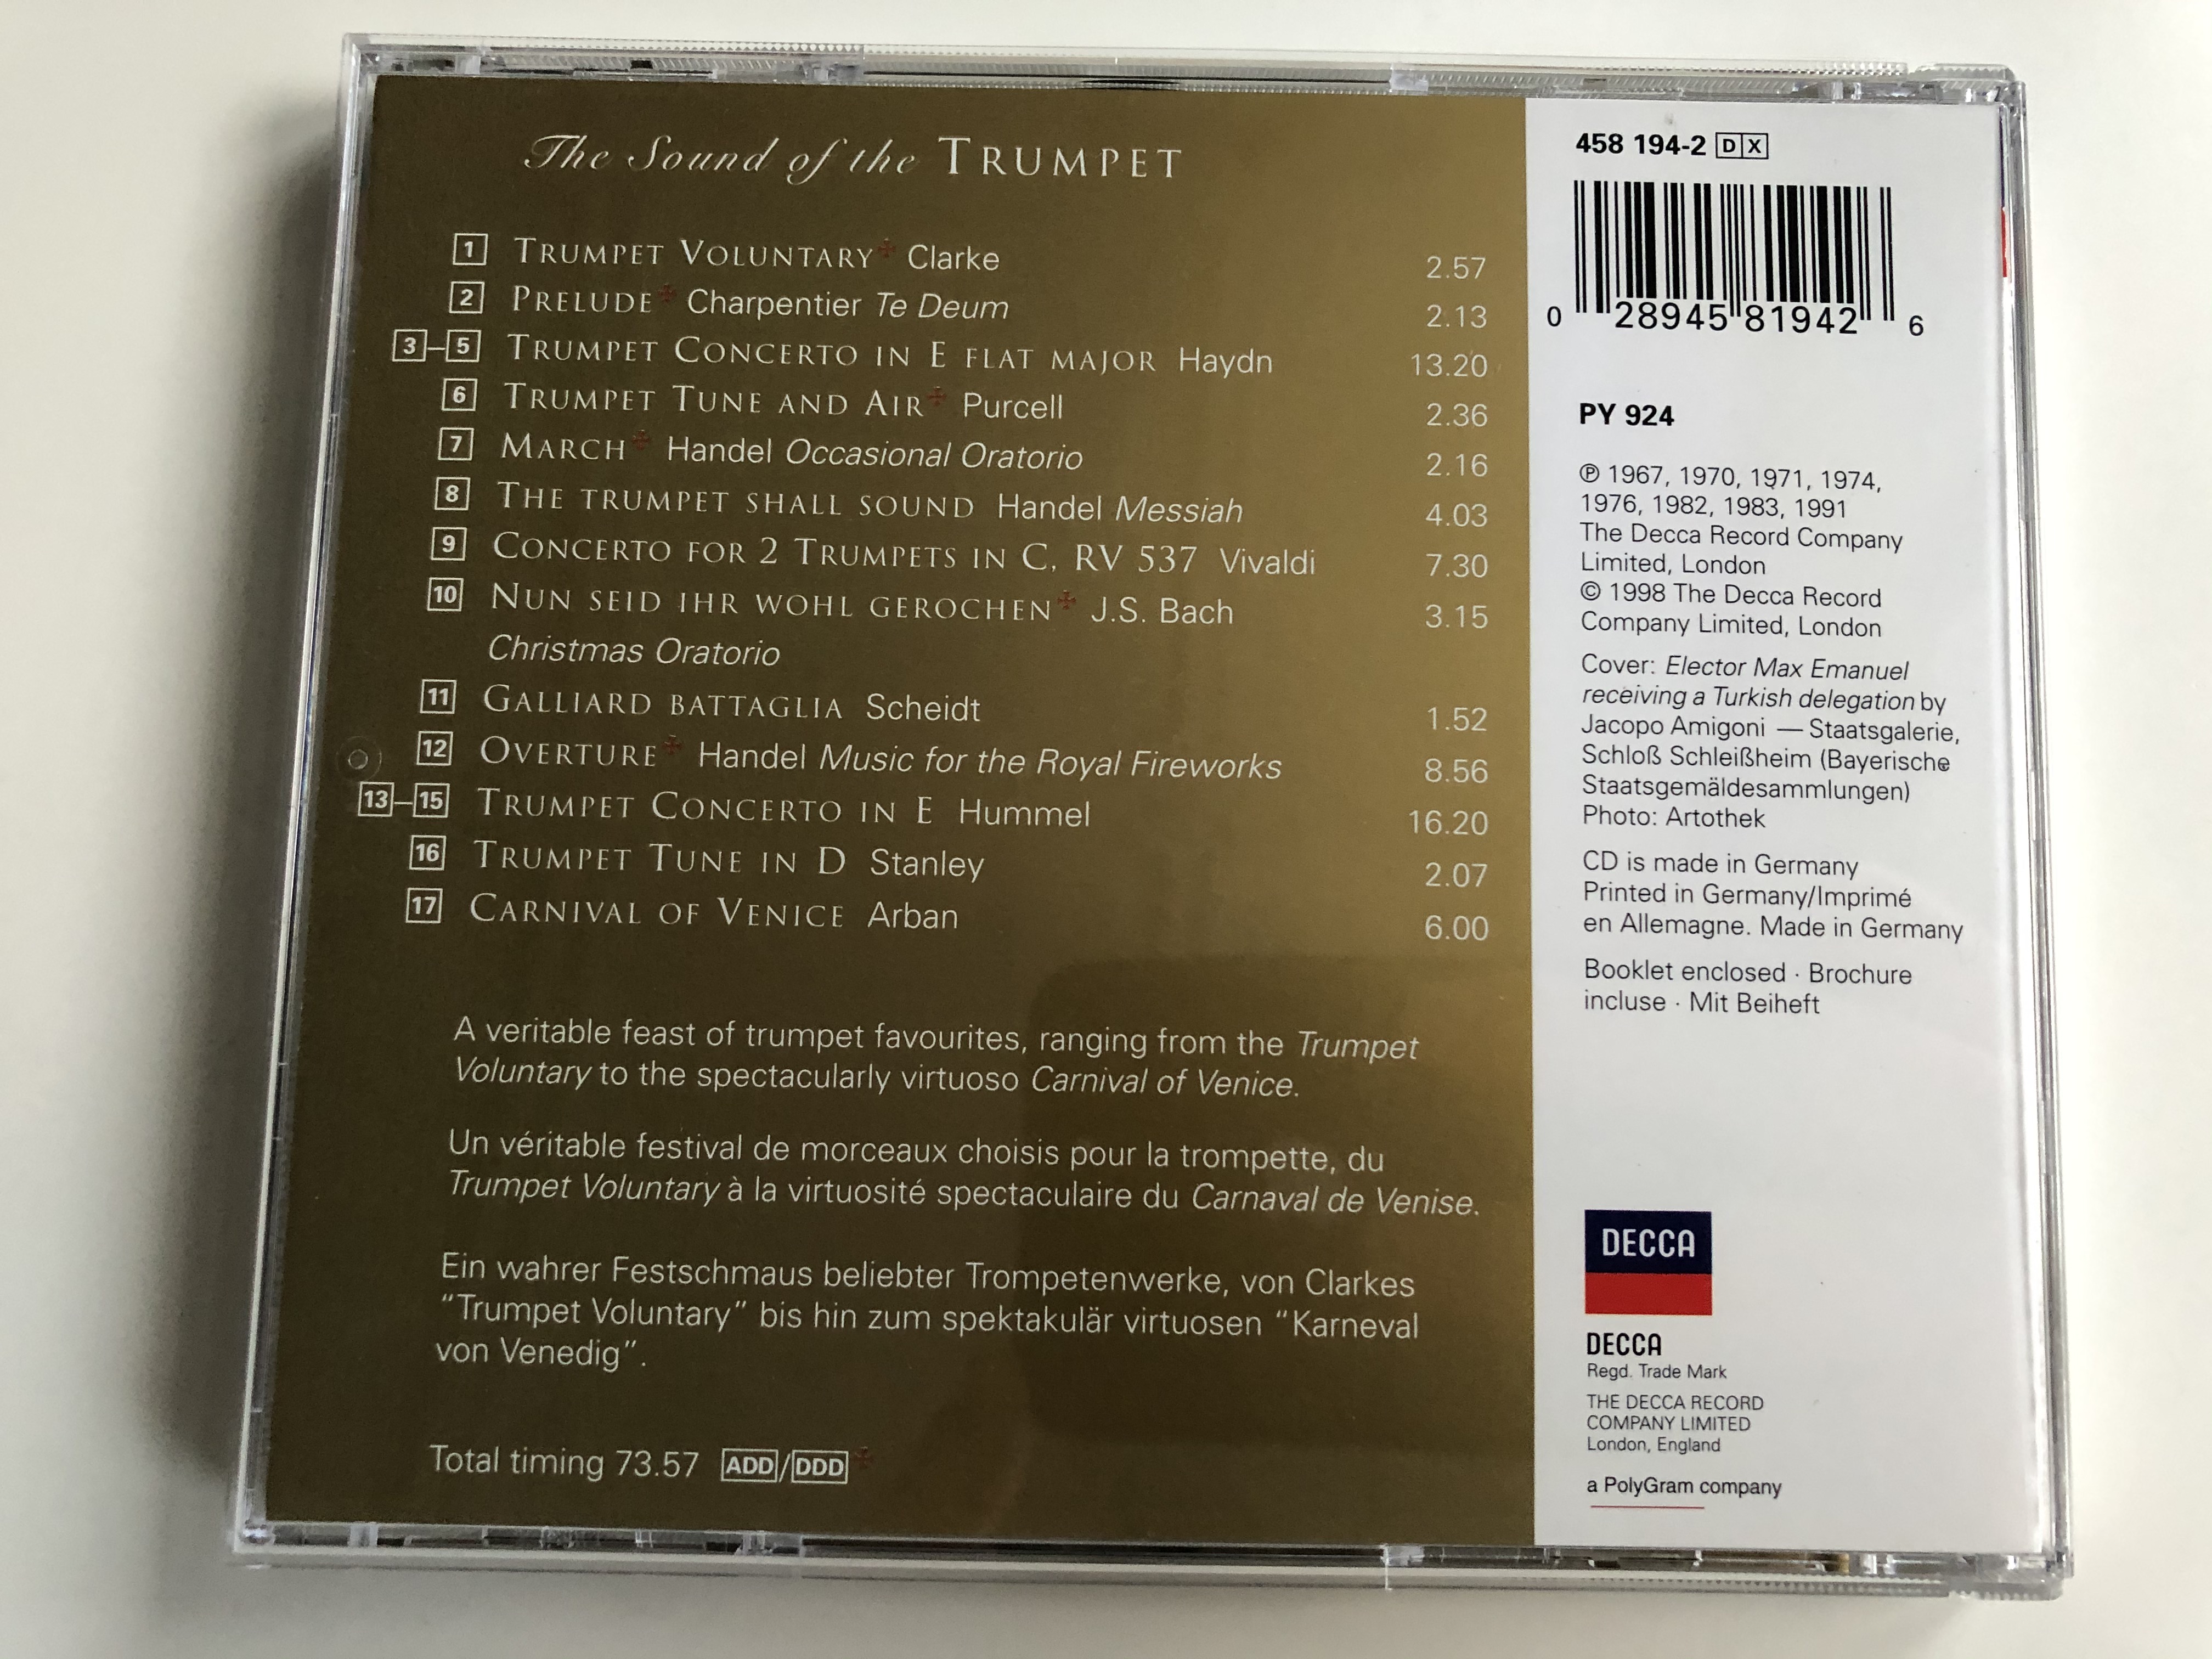 the-sound-of-the-trupmet-clarke-trumpet-voluntary-haydn-trumpet-concerto-purcell-trumpet-tune-and-air-handel-the-trumpet-shall-sound-hummel-trumpet-concerto-stanley-trumpet-tune-5-.jpg